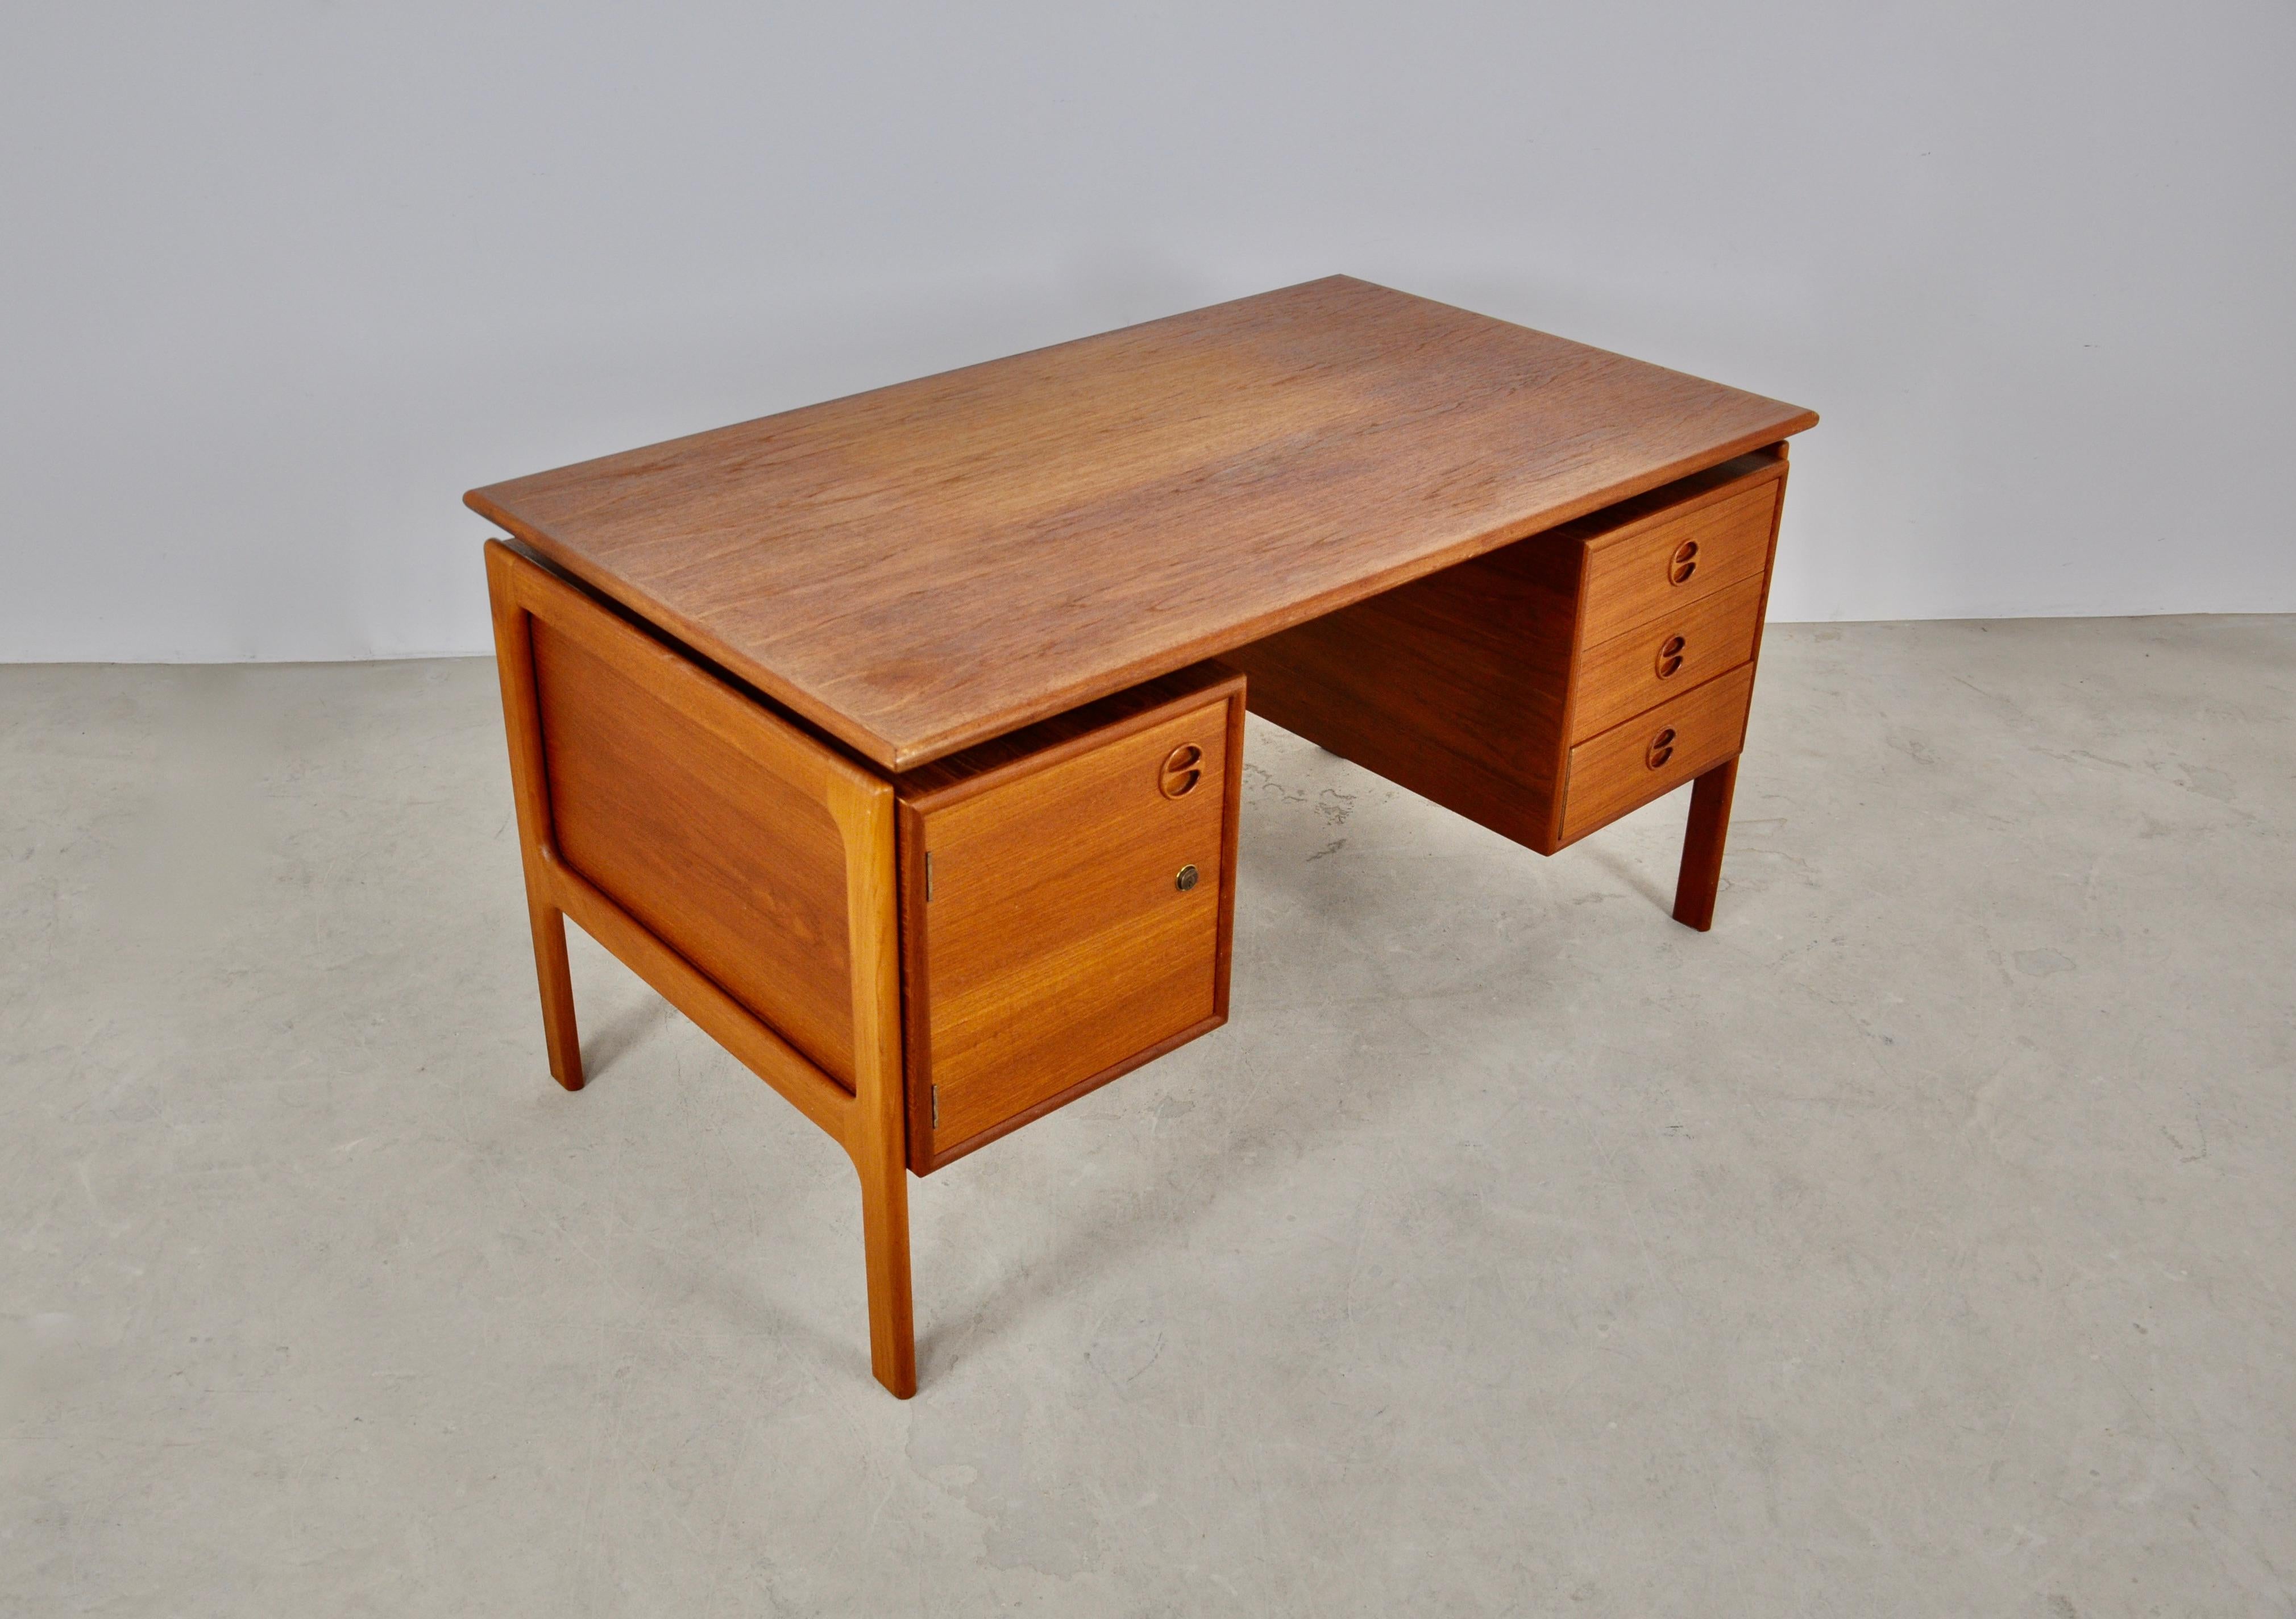 Teak desk with 3 drawers and a door. Wear due to time and age of the desk.